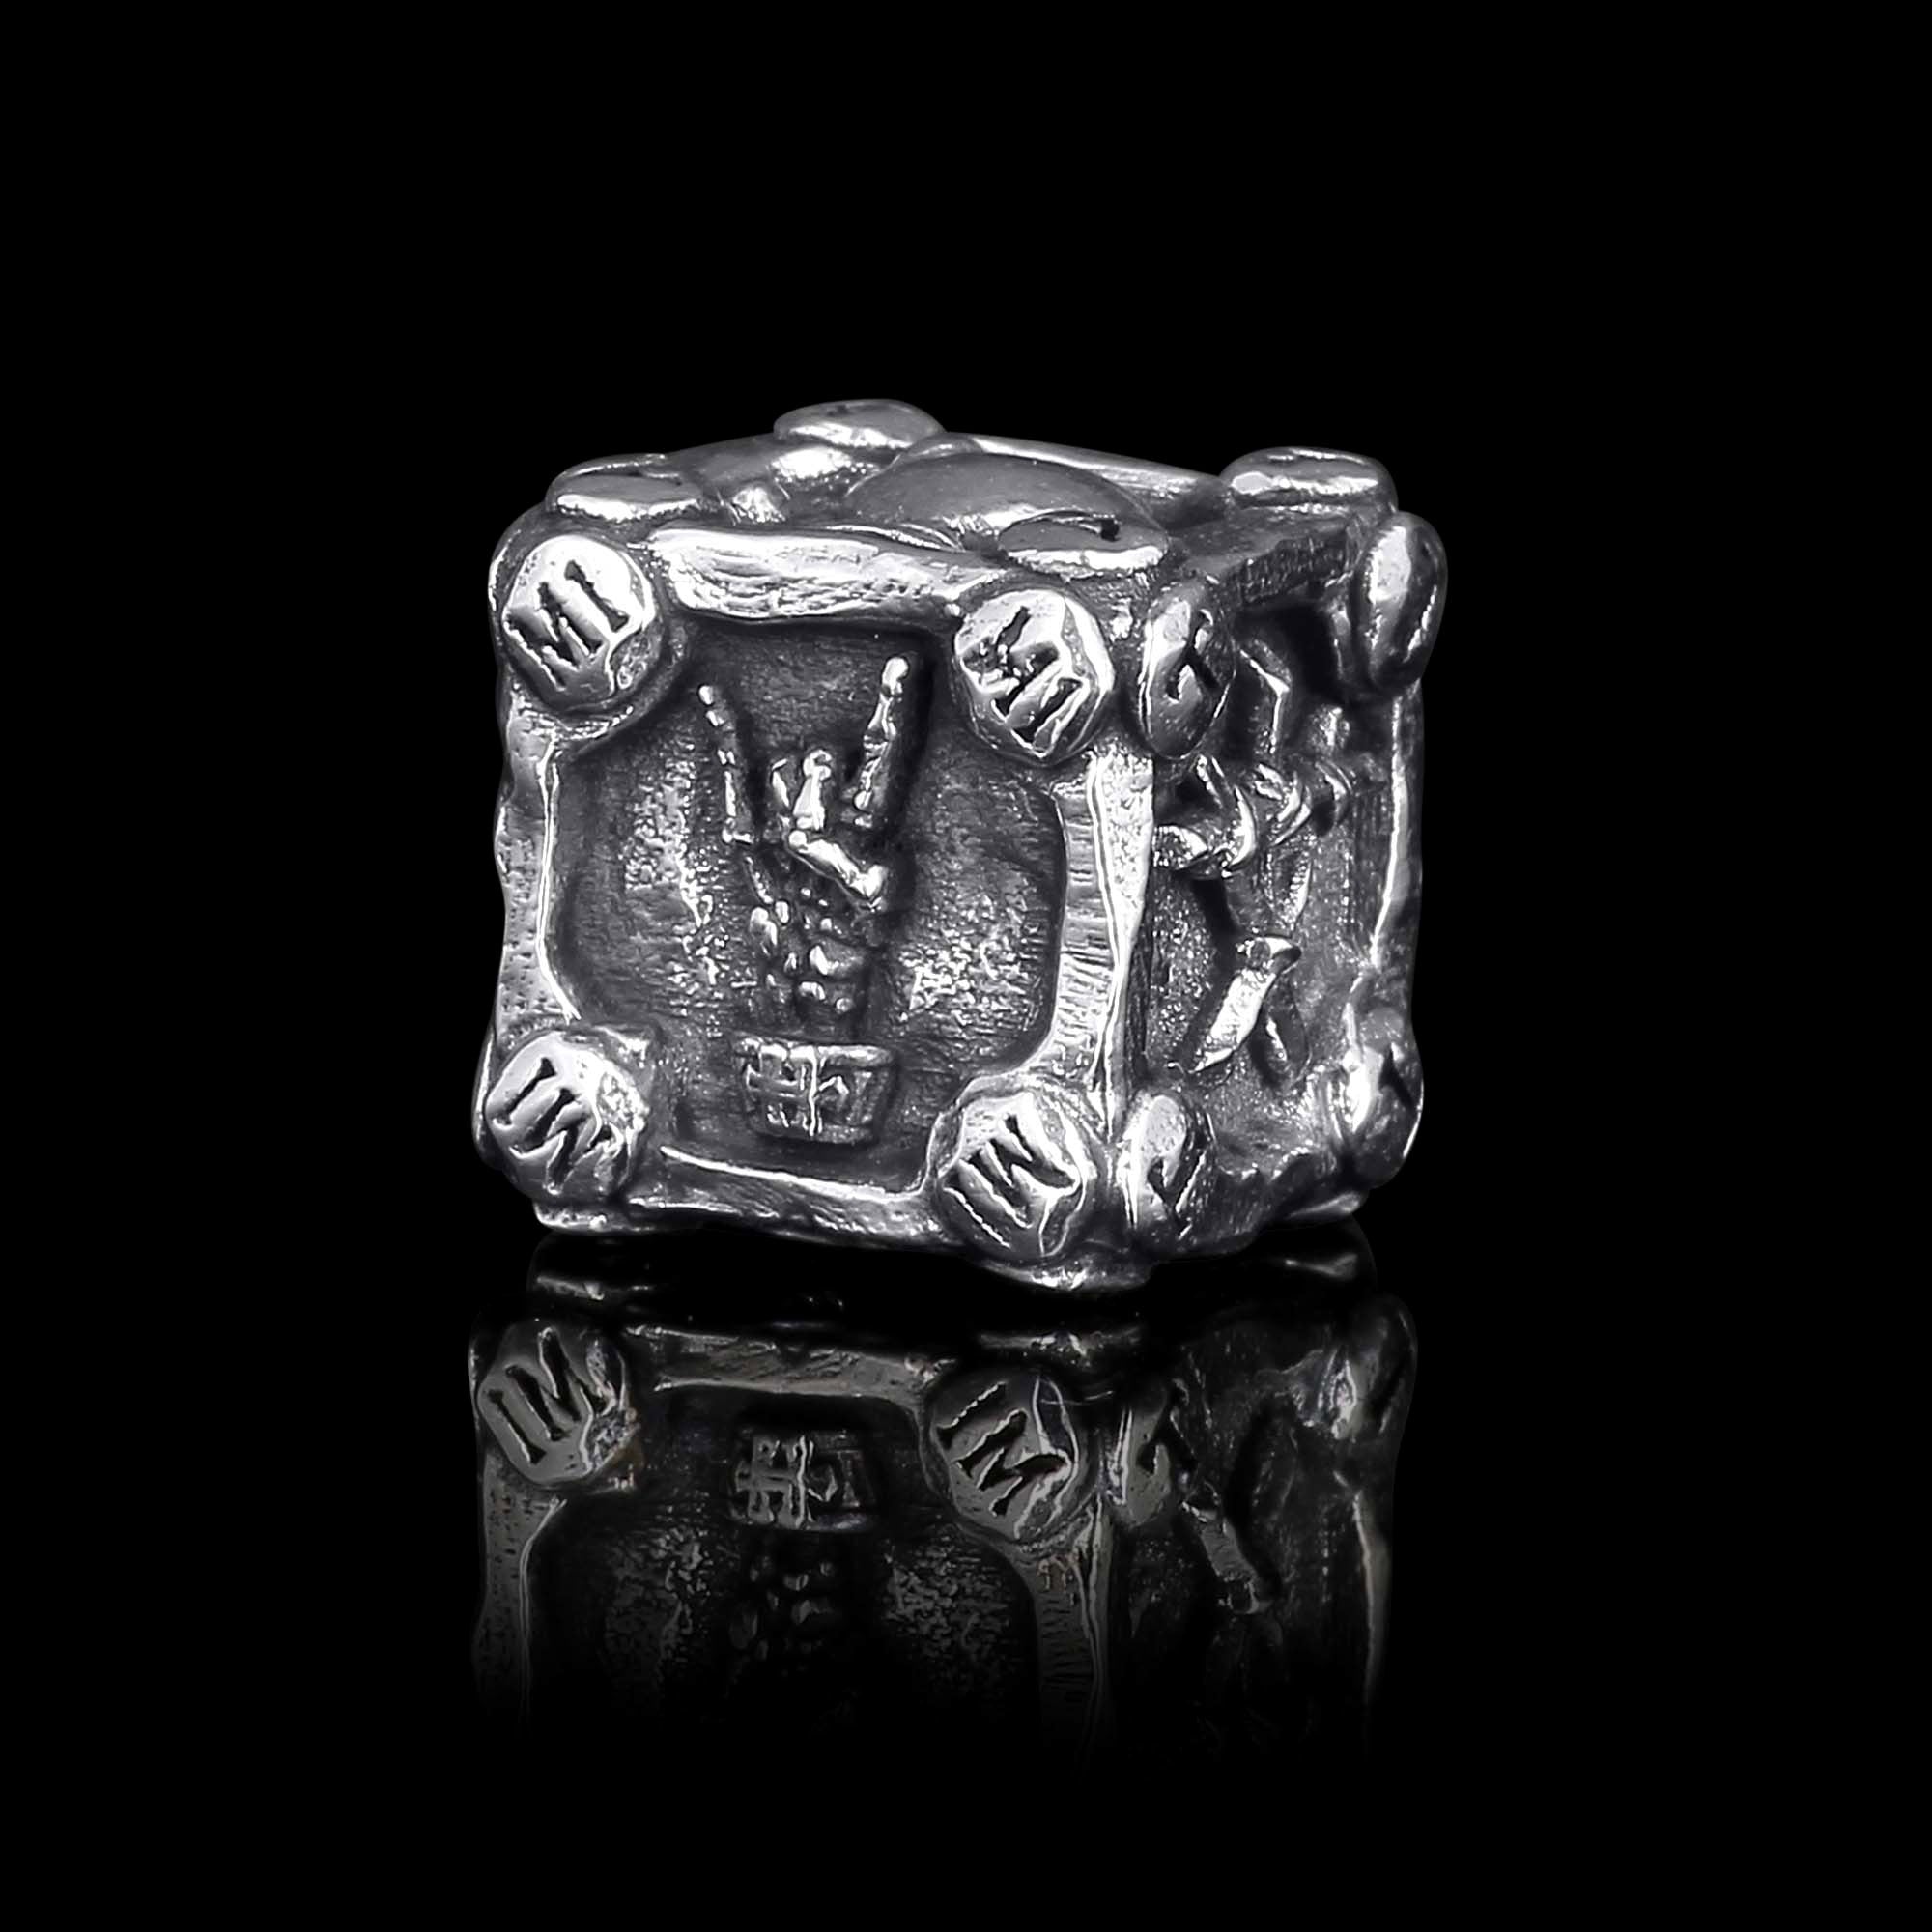 Dice of Doom - Hellfest limited edition stage selection dice